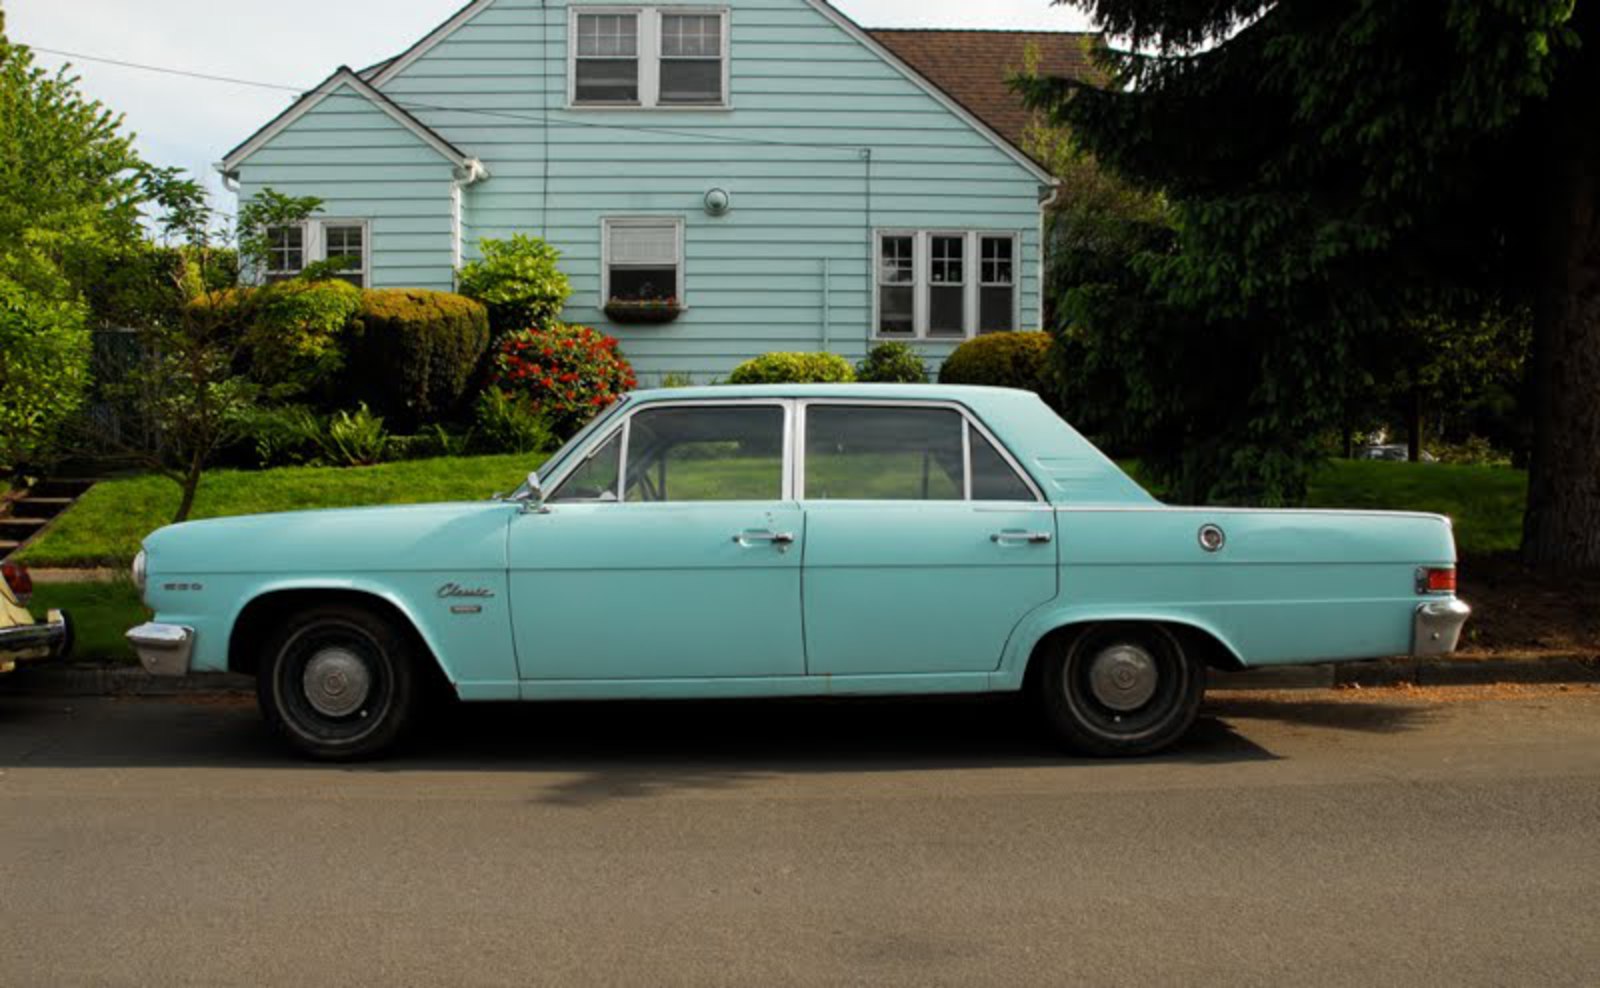 OLD PARKED CARS.: 1965 Rambler Classic 550.